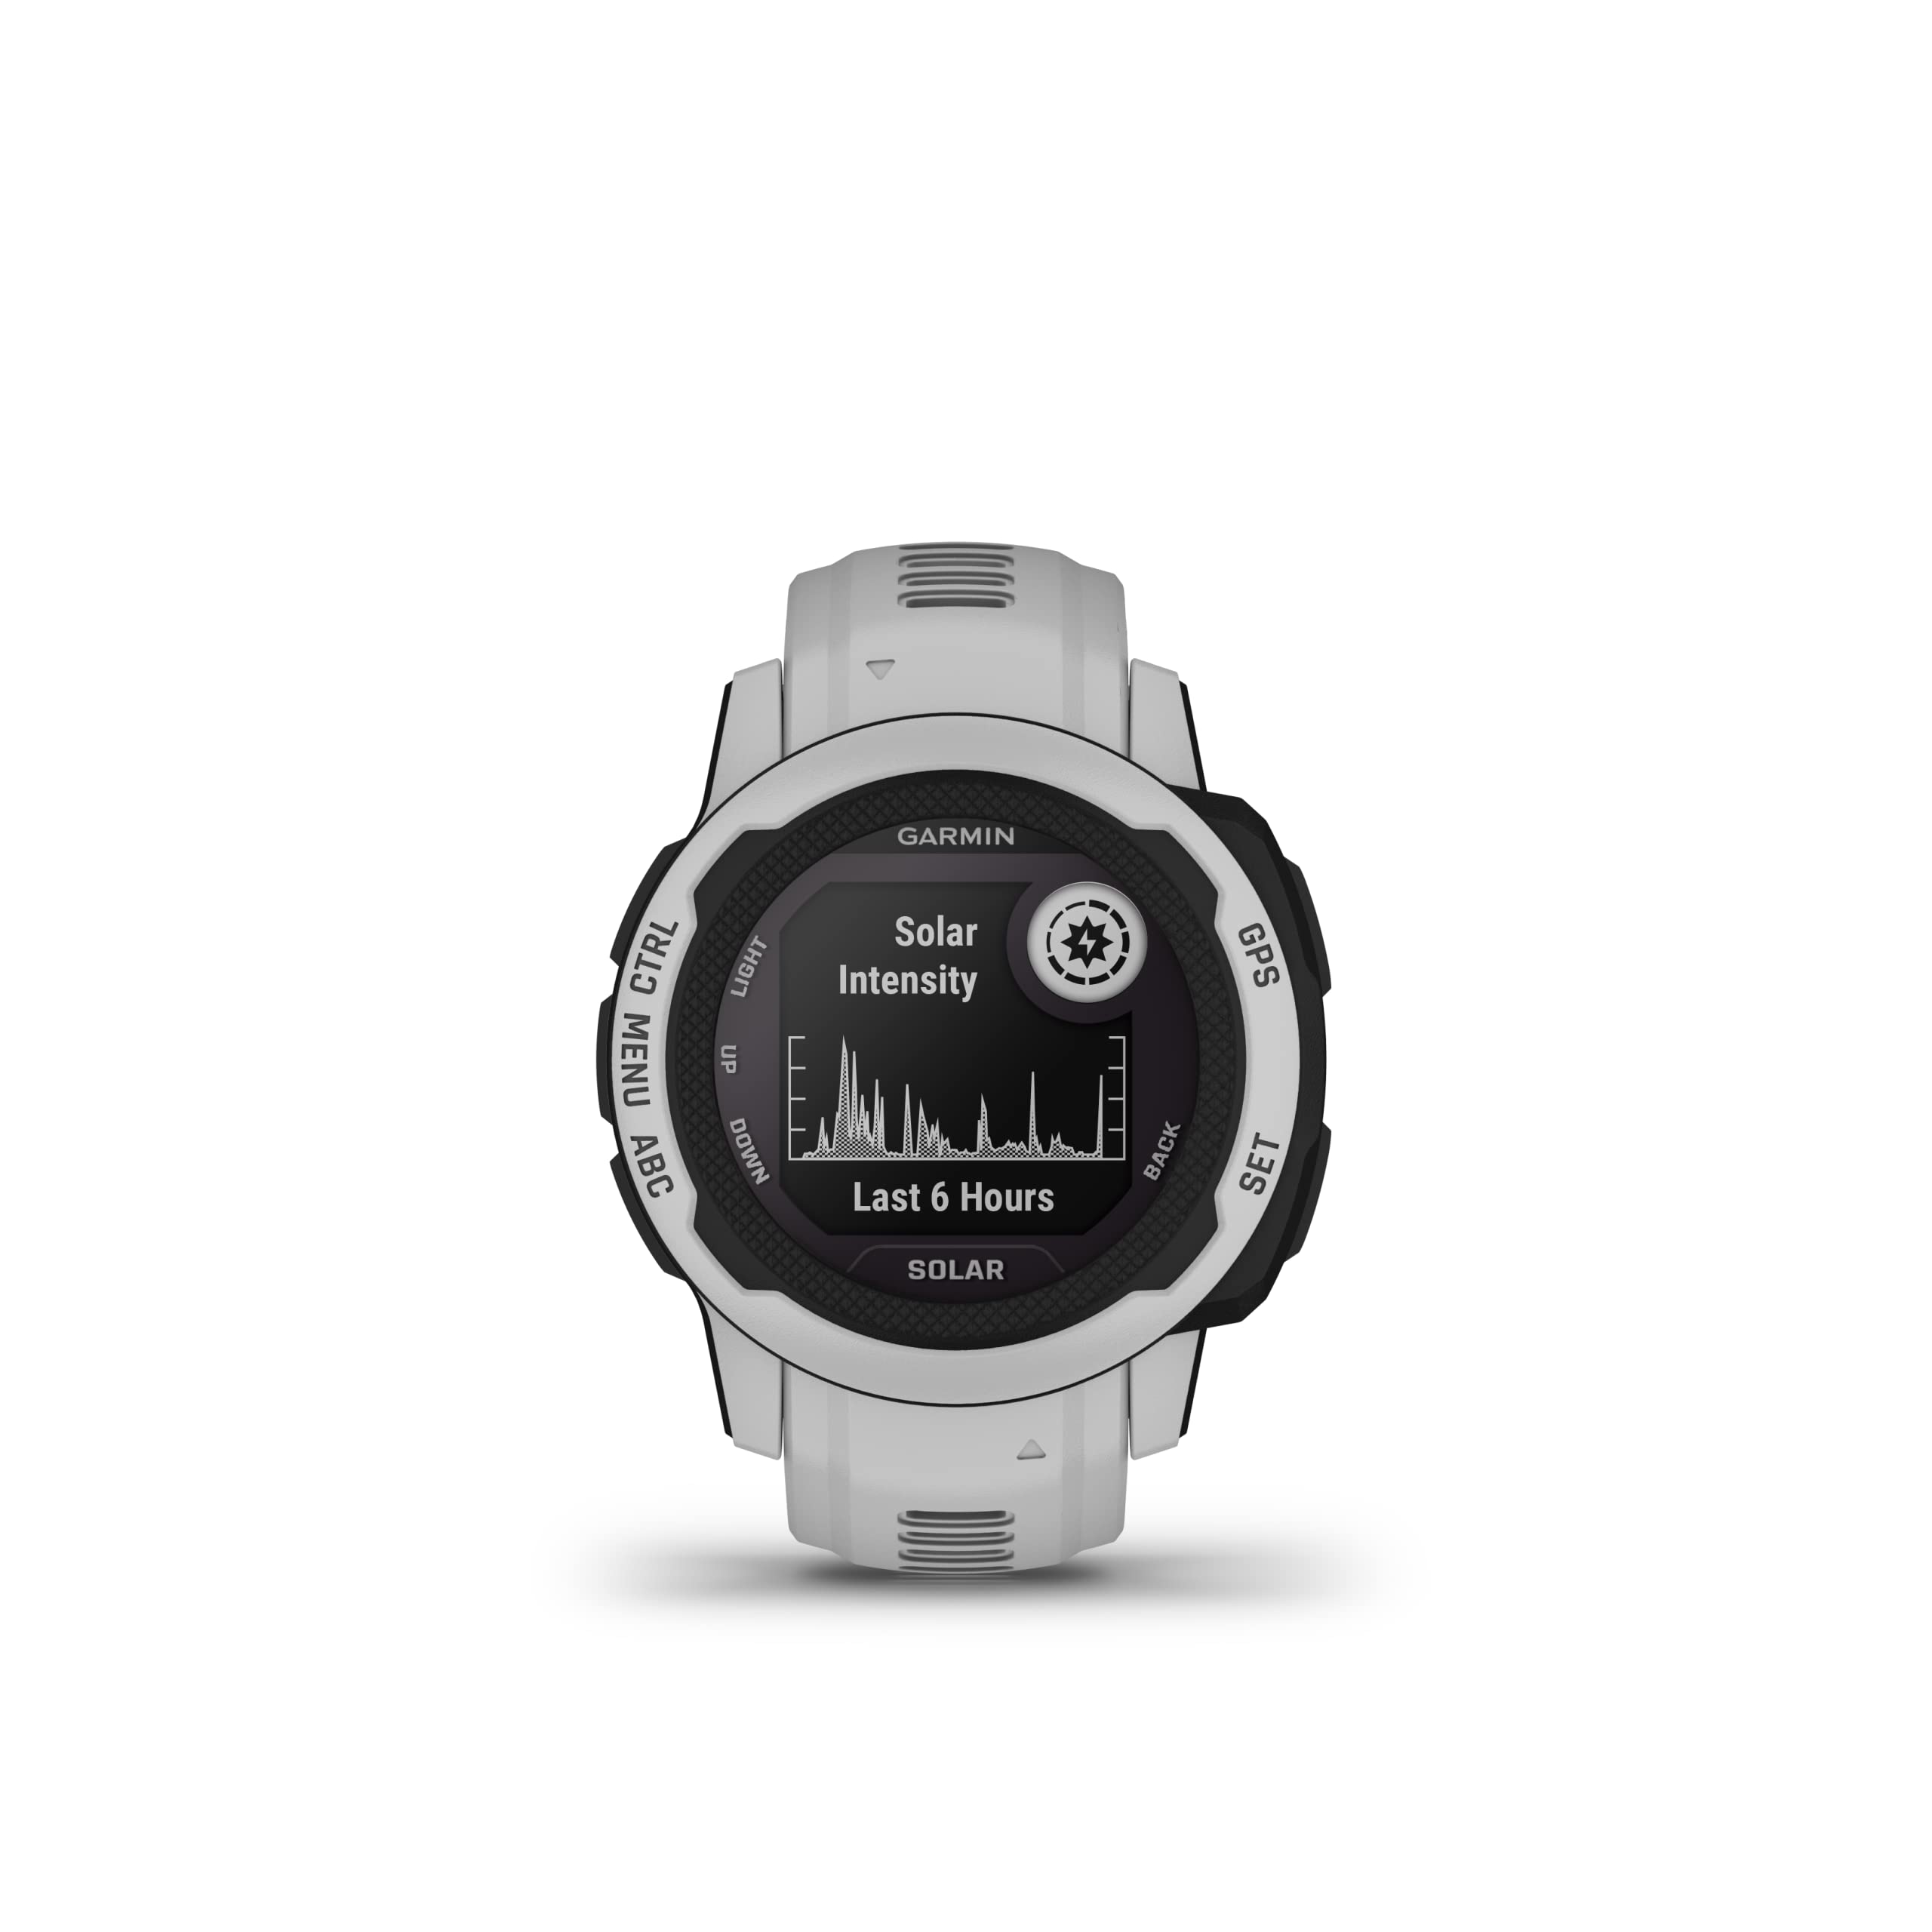 Garmin Instinct 2S Solar, Smaller-Sized GPS Outdoor Watch, Solar Charging Capabilities, Multi-GNSS Support, Tracback Routing, Mist Gray